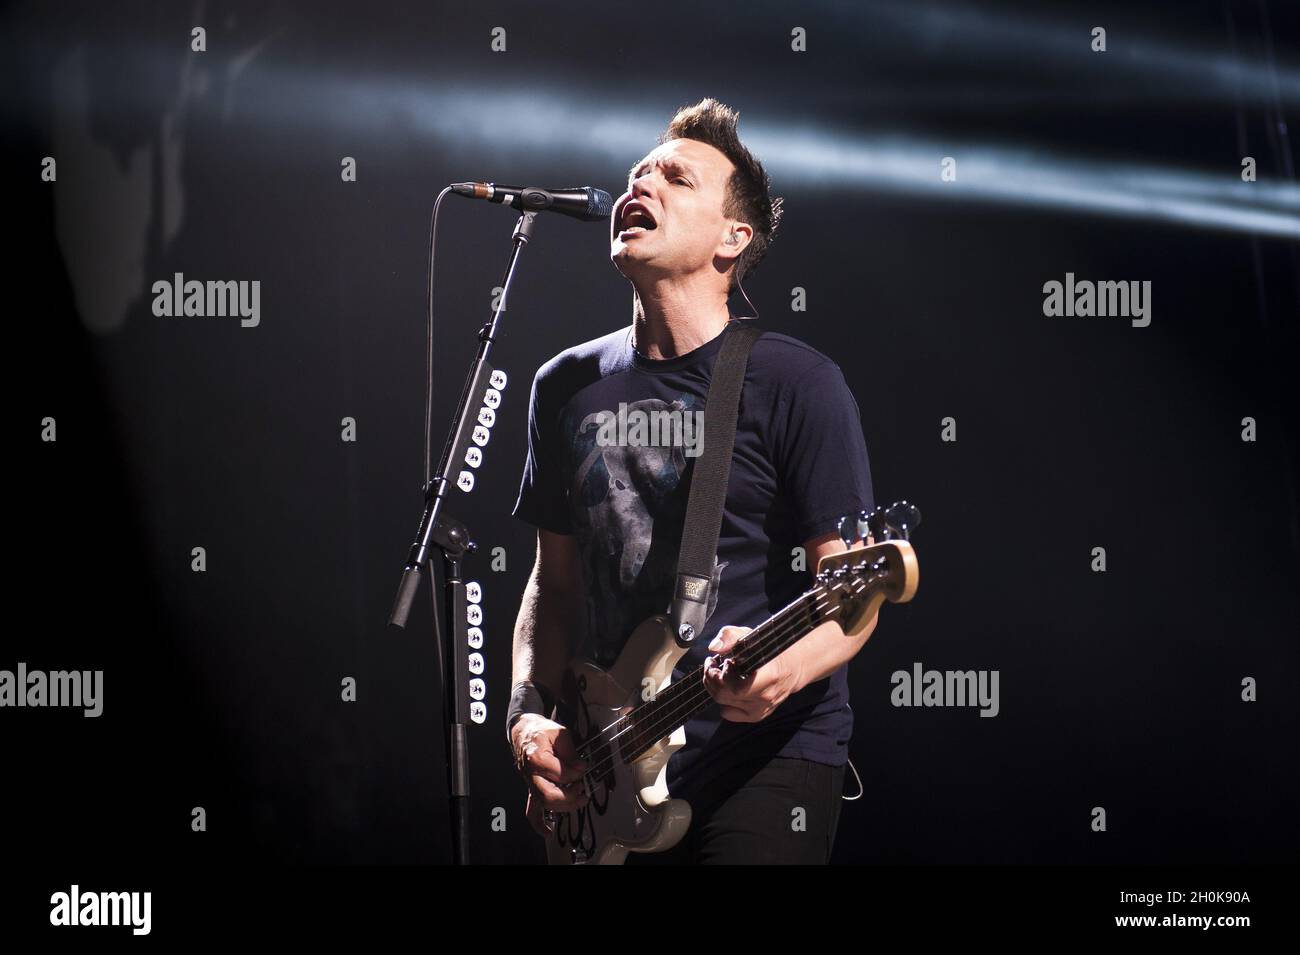 Mark Hopper of Blink 182 performs on stage at the O2 arena, London